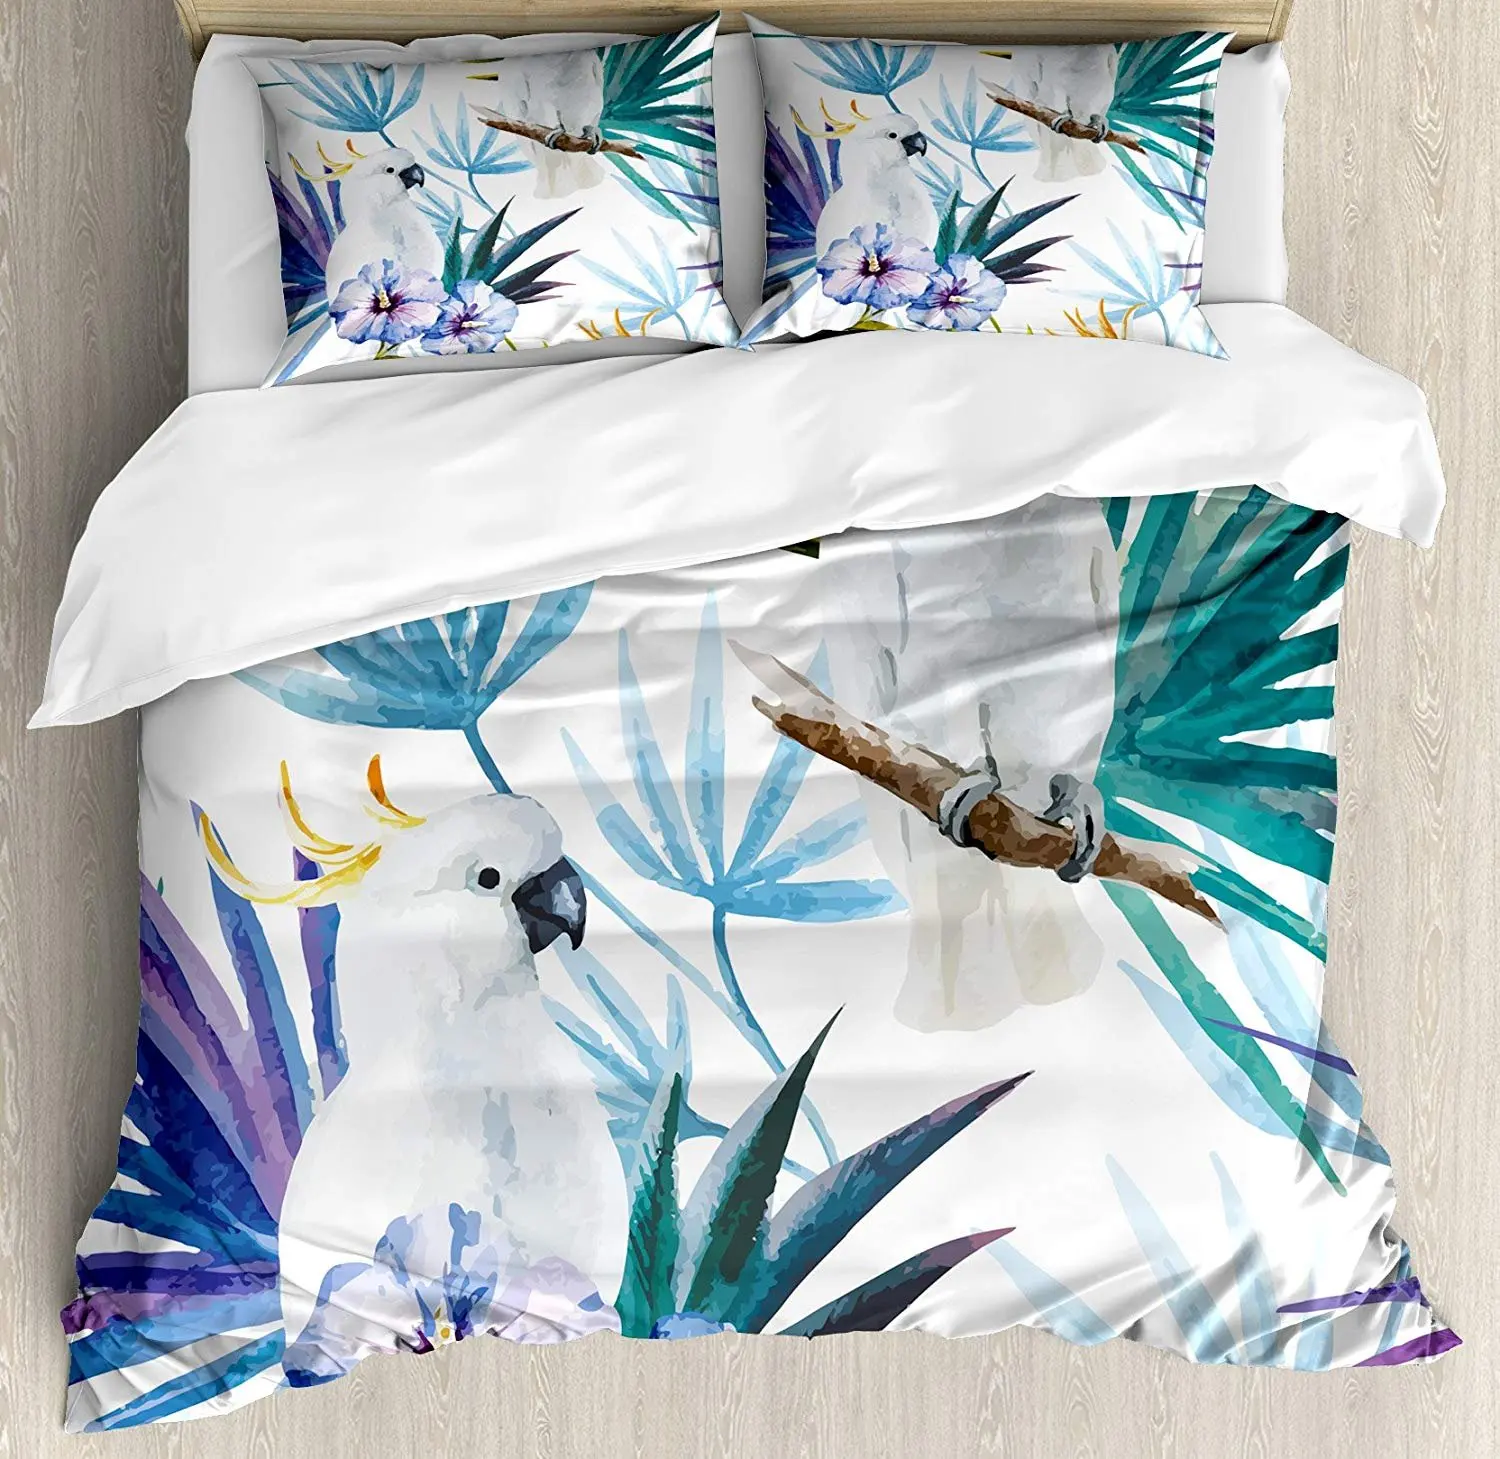 

Tropical Bedding Set Watercolor White Parrot Birds on Palm Tree Branches Leaves Exotic Nature Artwork Duvet Cover Pillowcase